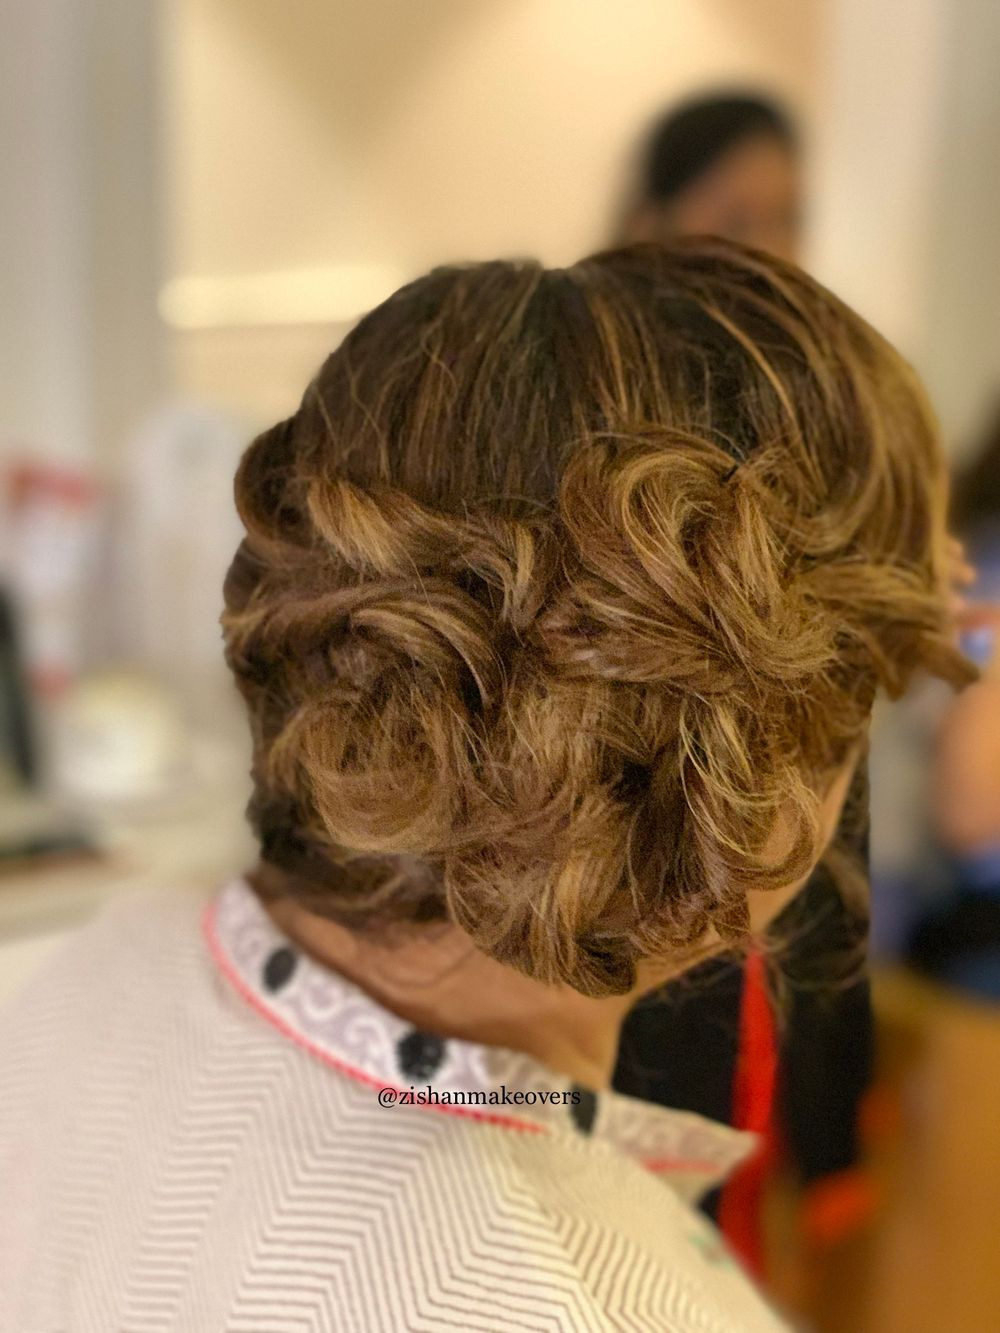 Photo From Hairstyles - By Zishan Makeovers